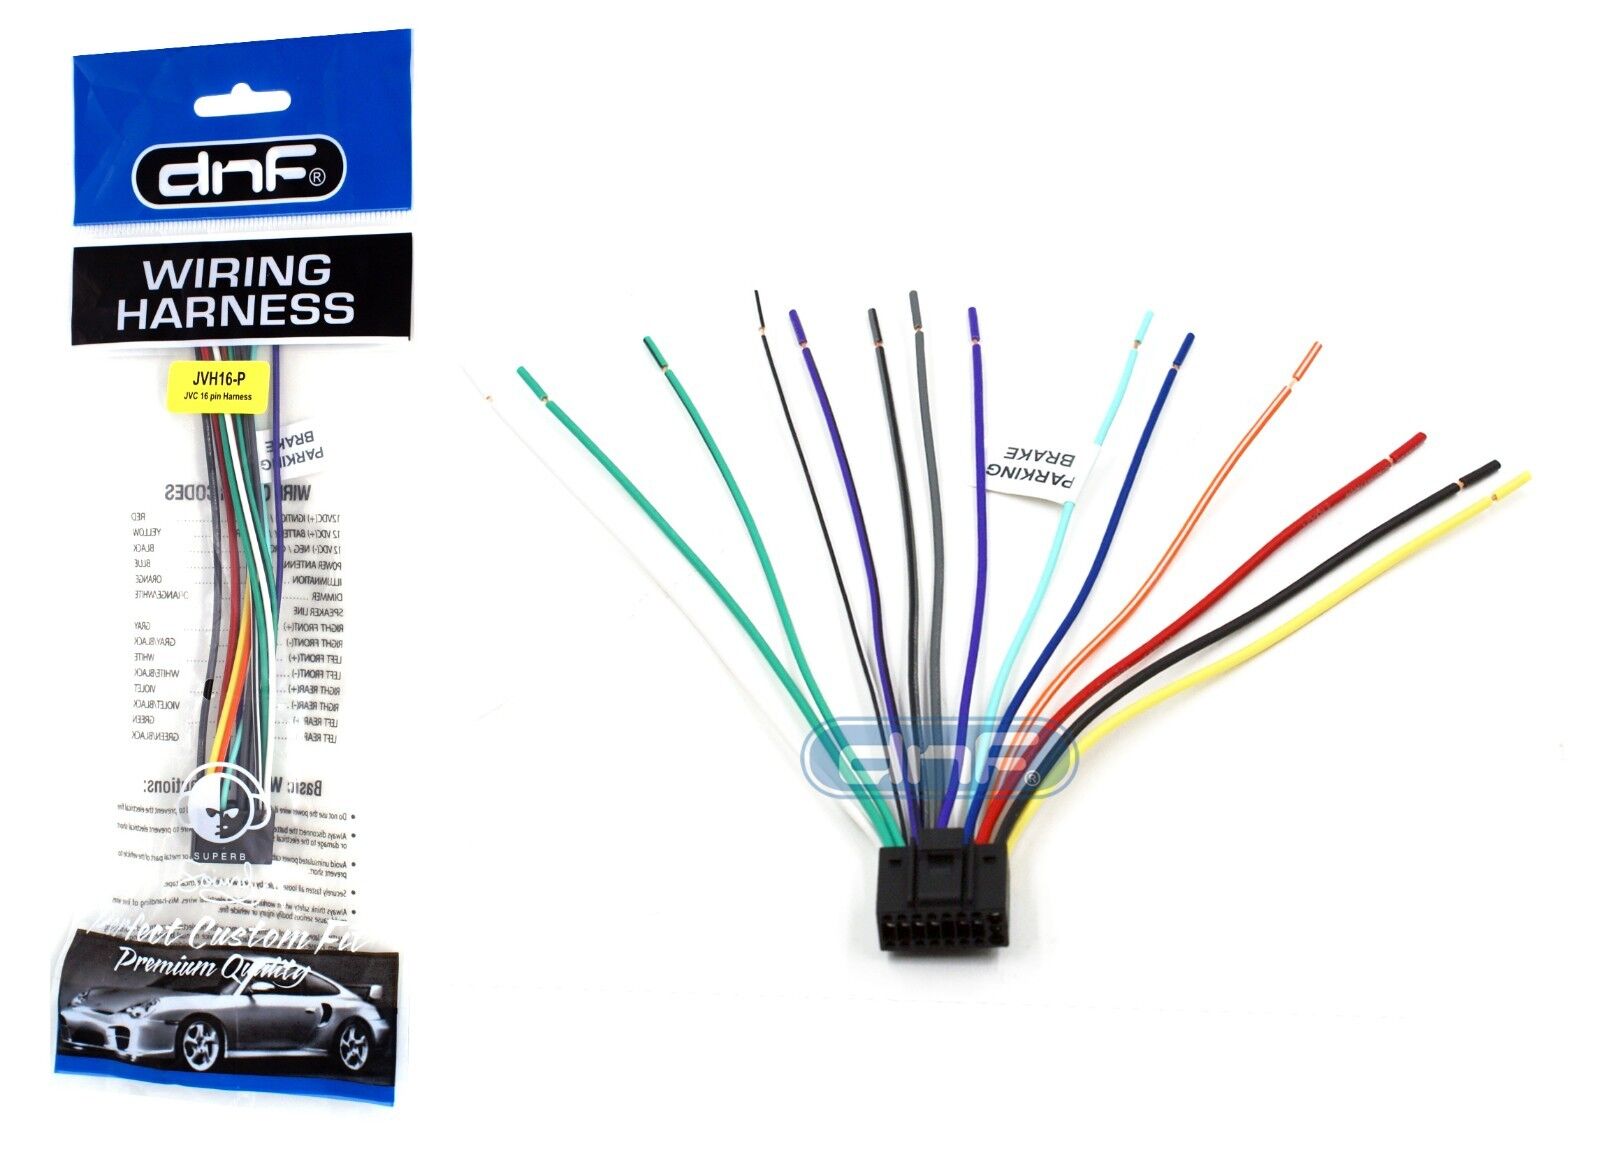 NEW WIRE HARNESS FOR JVC KW-AVX820 KWAVX820 Free Fast Shipping 